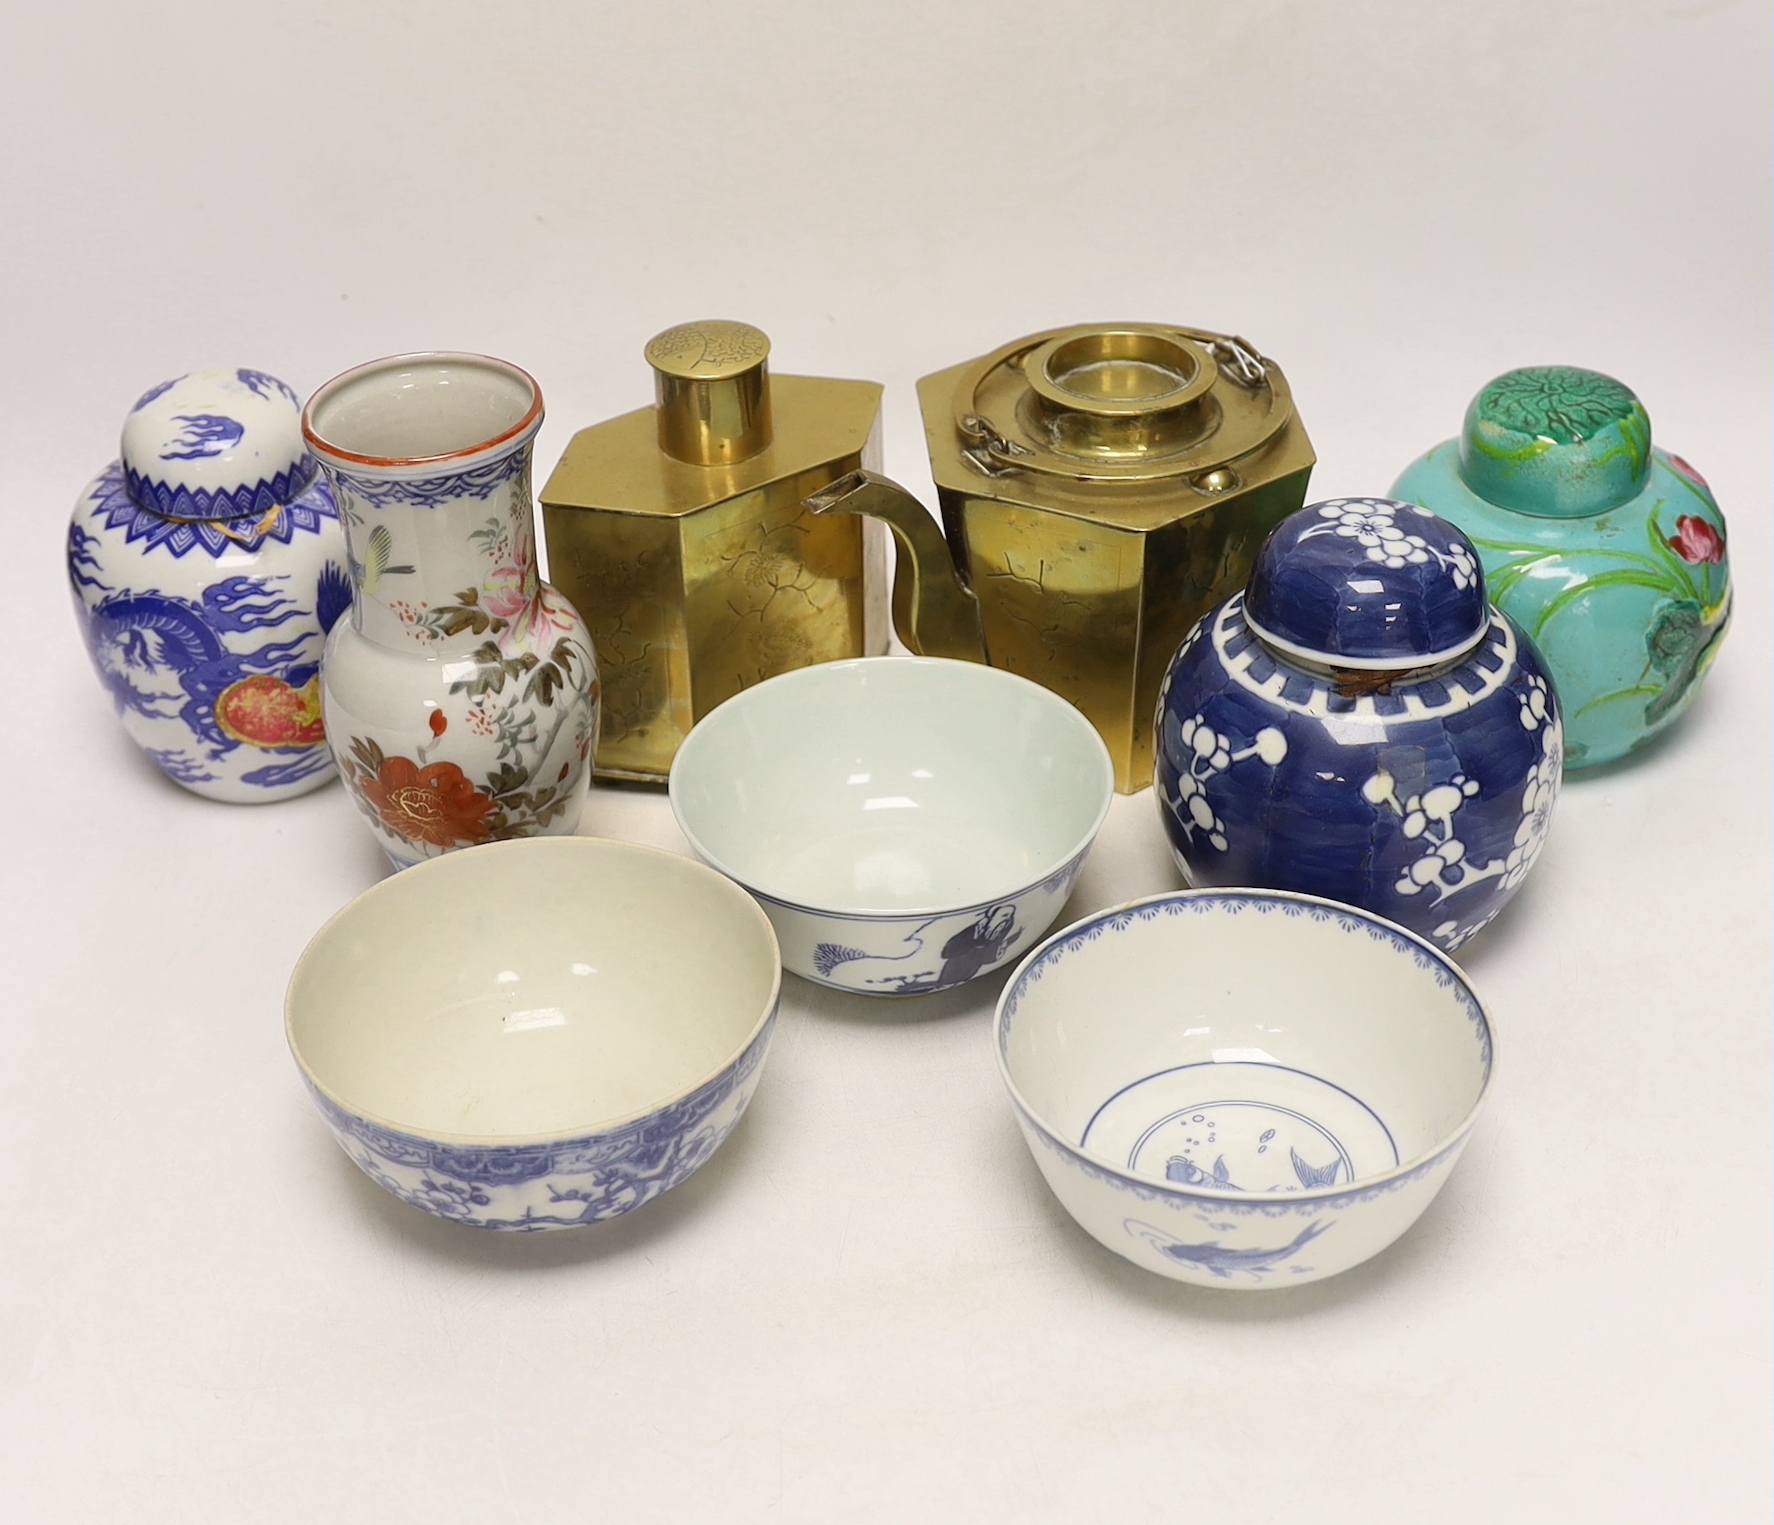 Chinese items including a brass tea caddy and kettle, blue and white porcelain bowls and a Japanese vase